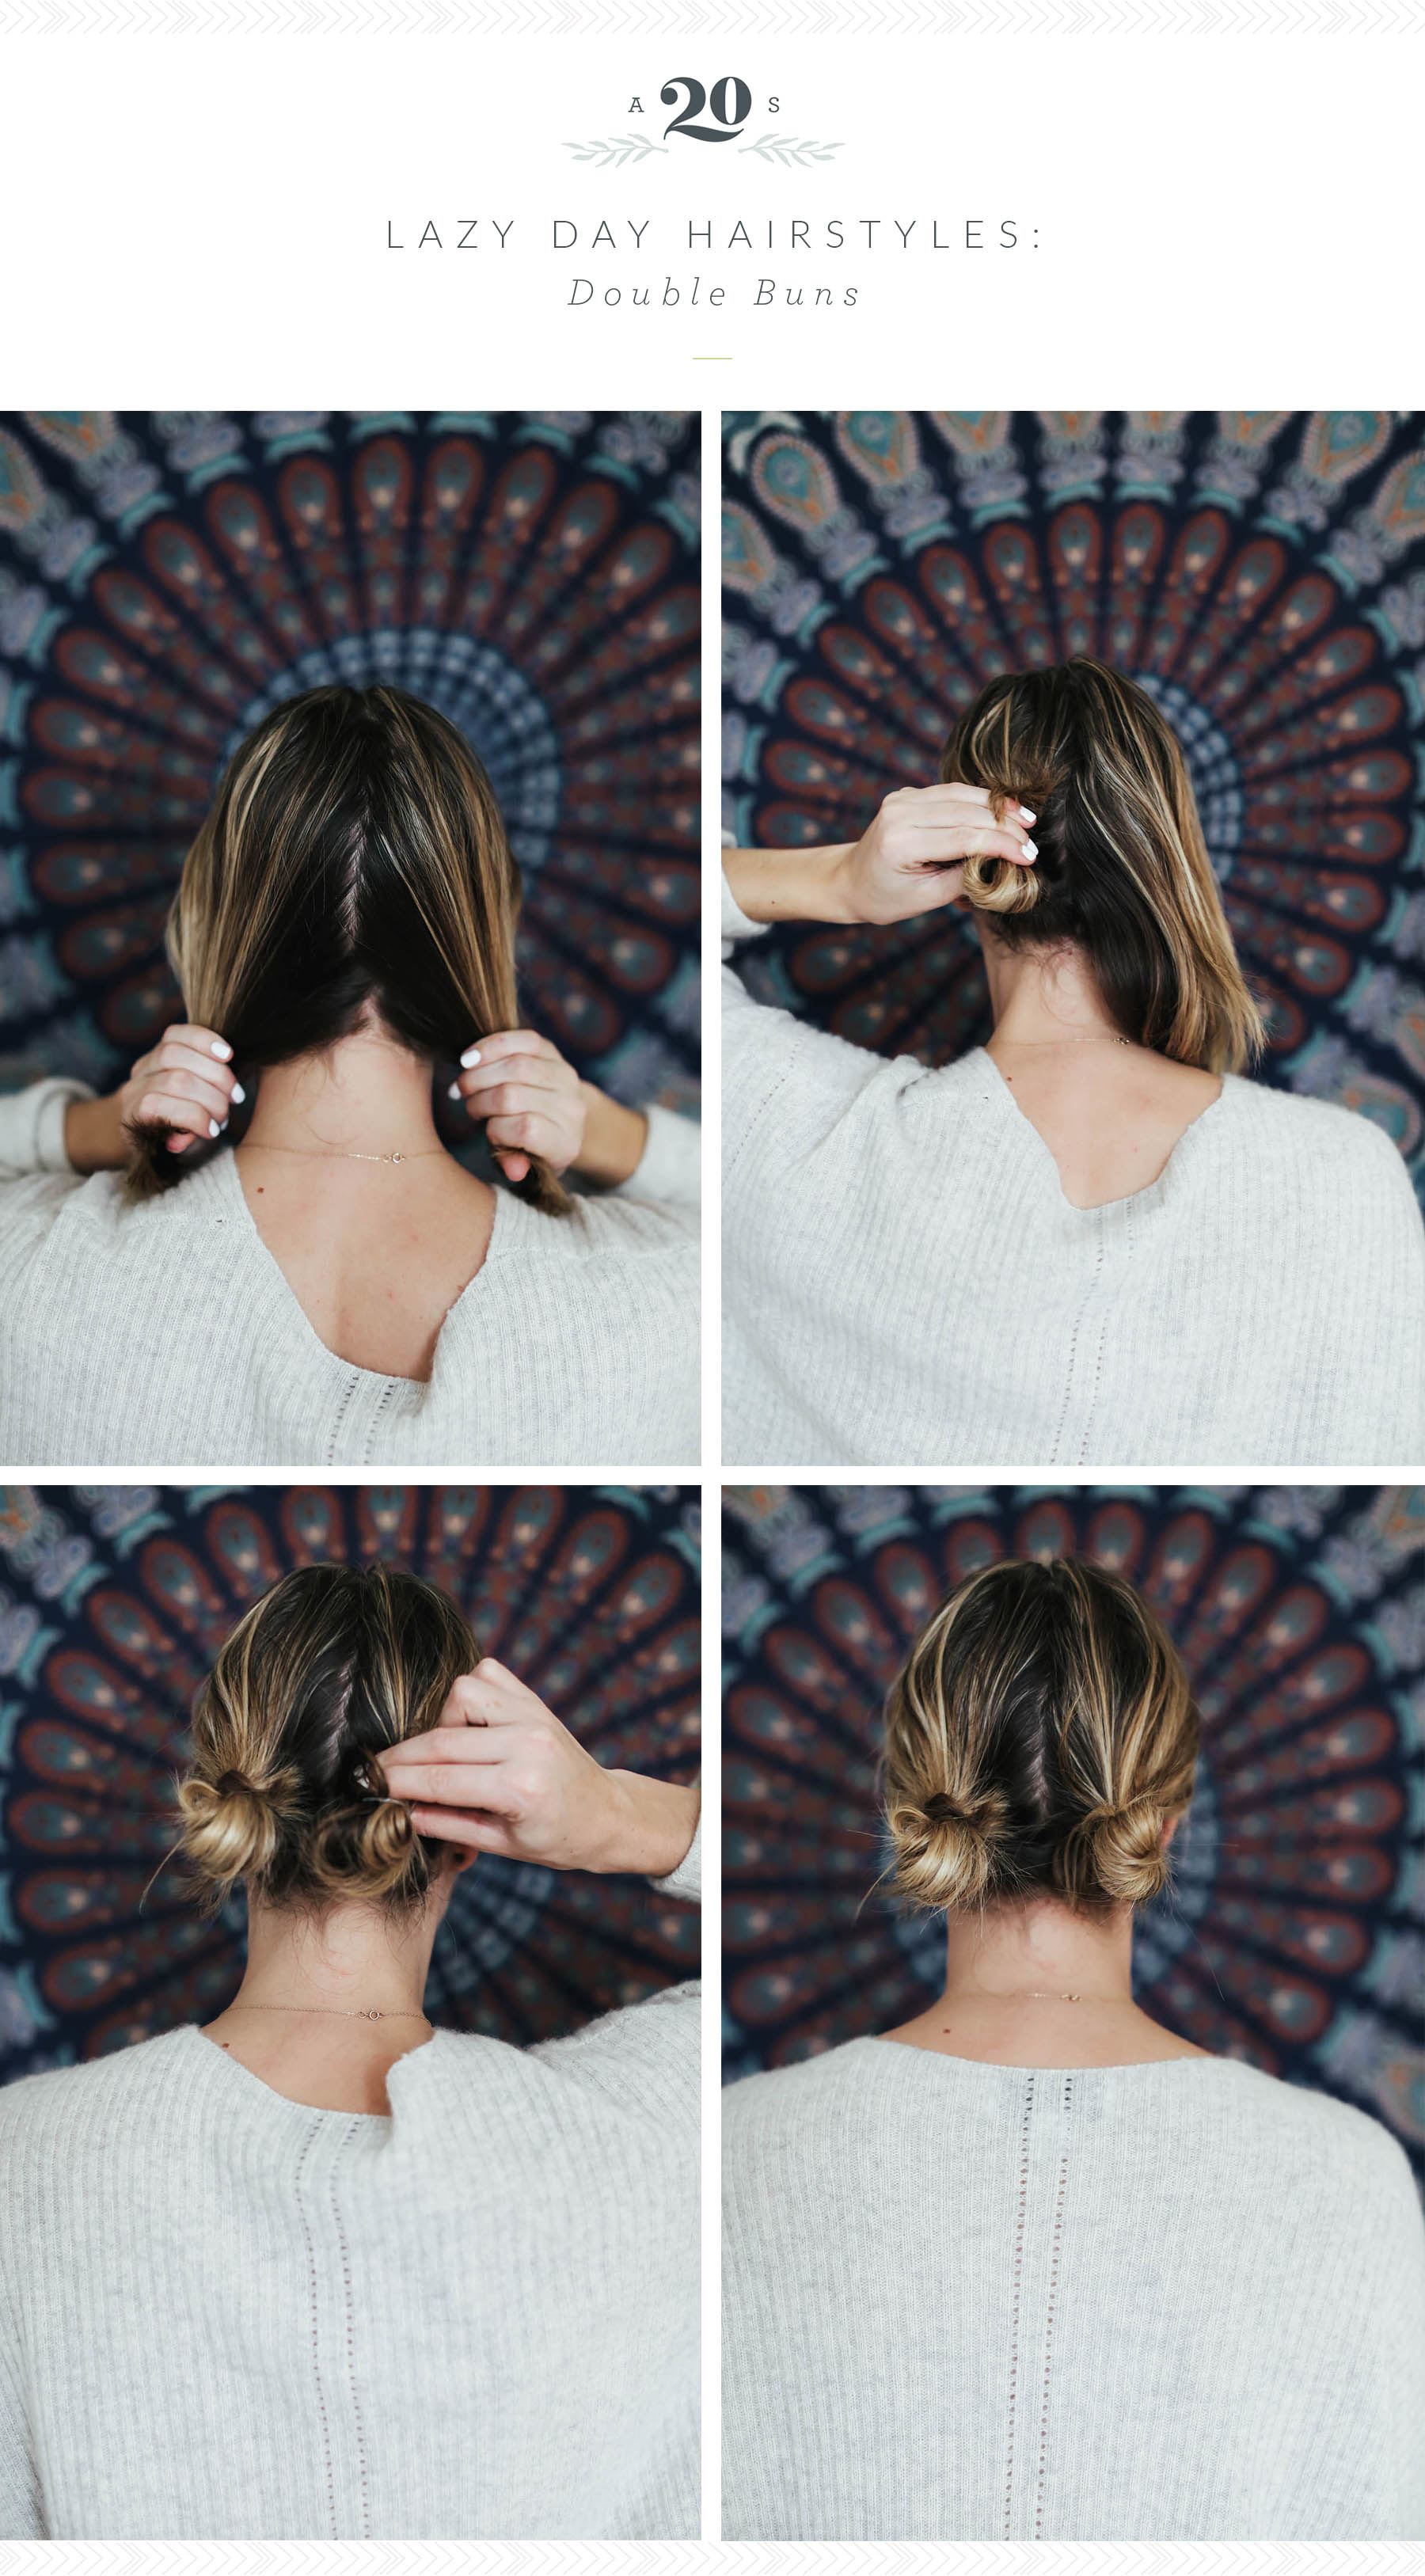 4 Go-To Hairstyles That Take Less Than 15 Minutes - Taylor, Lately